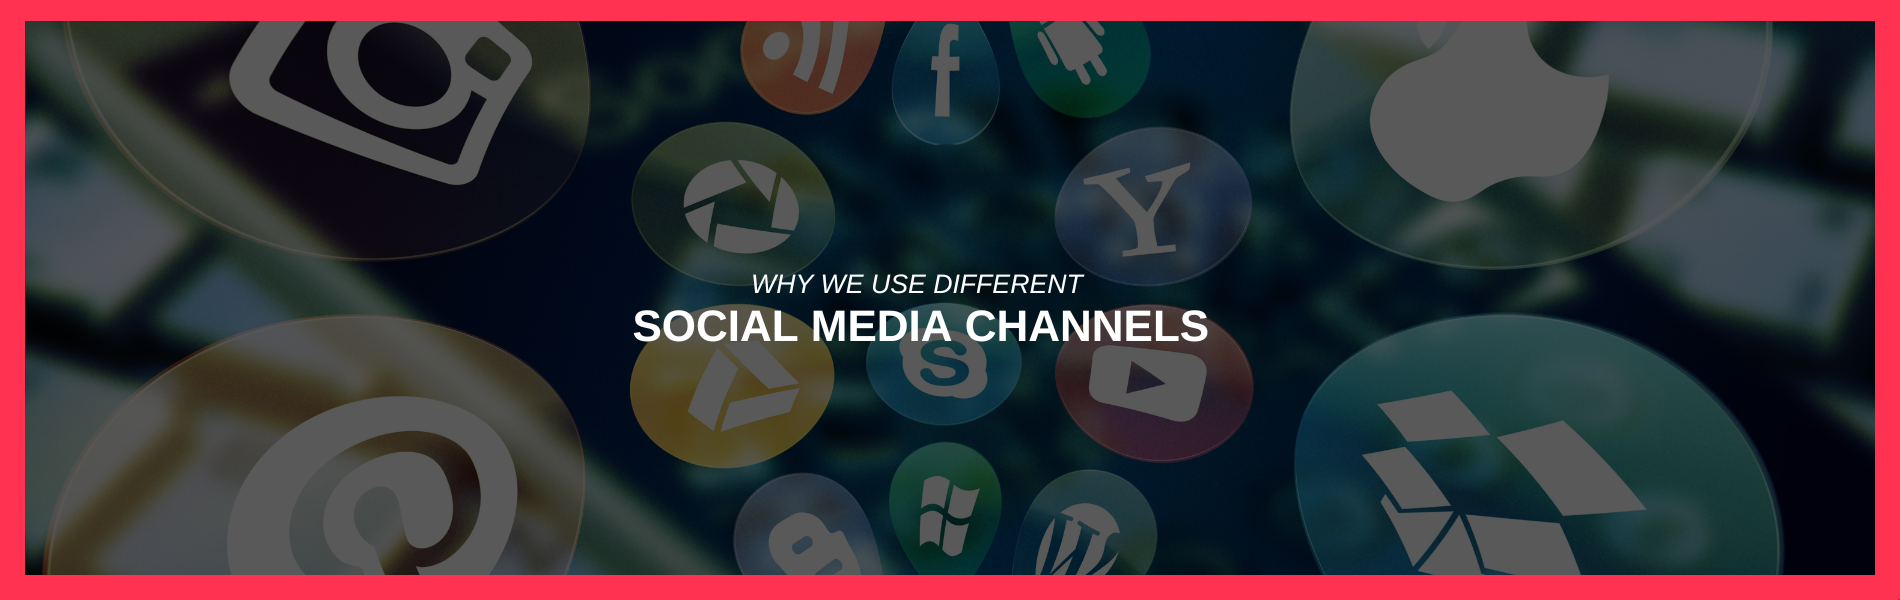 Why We Use Different Social Media Channels